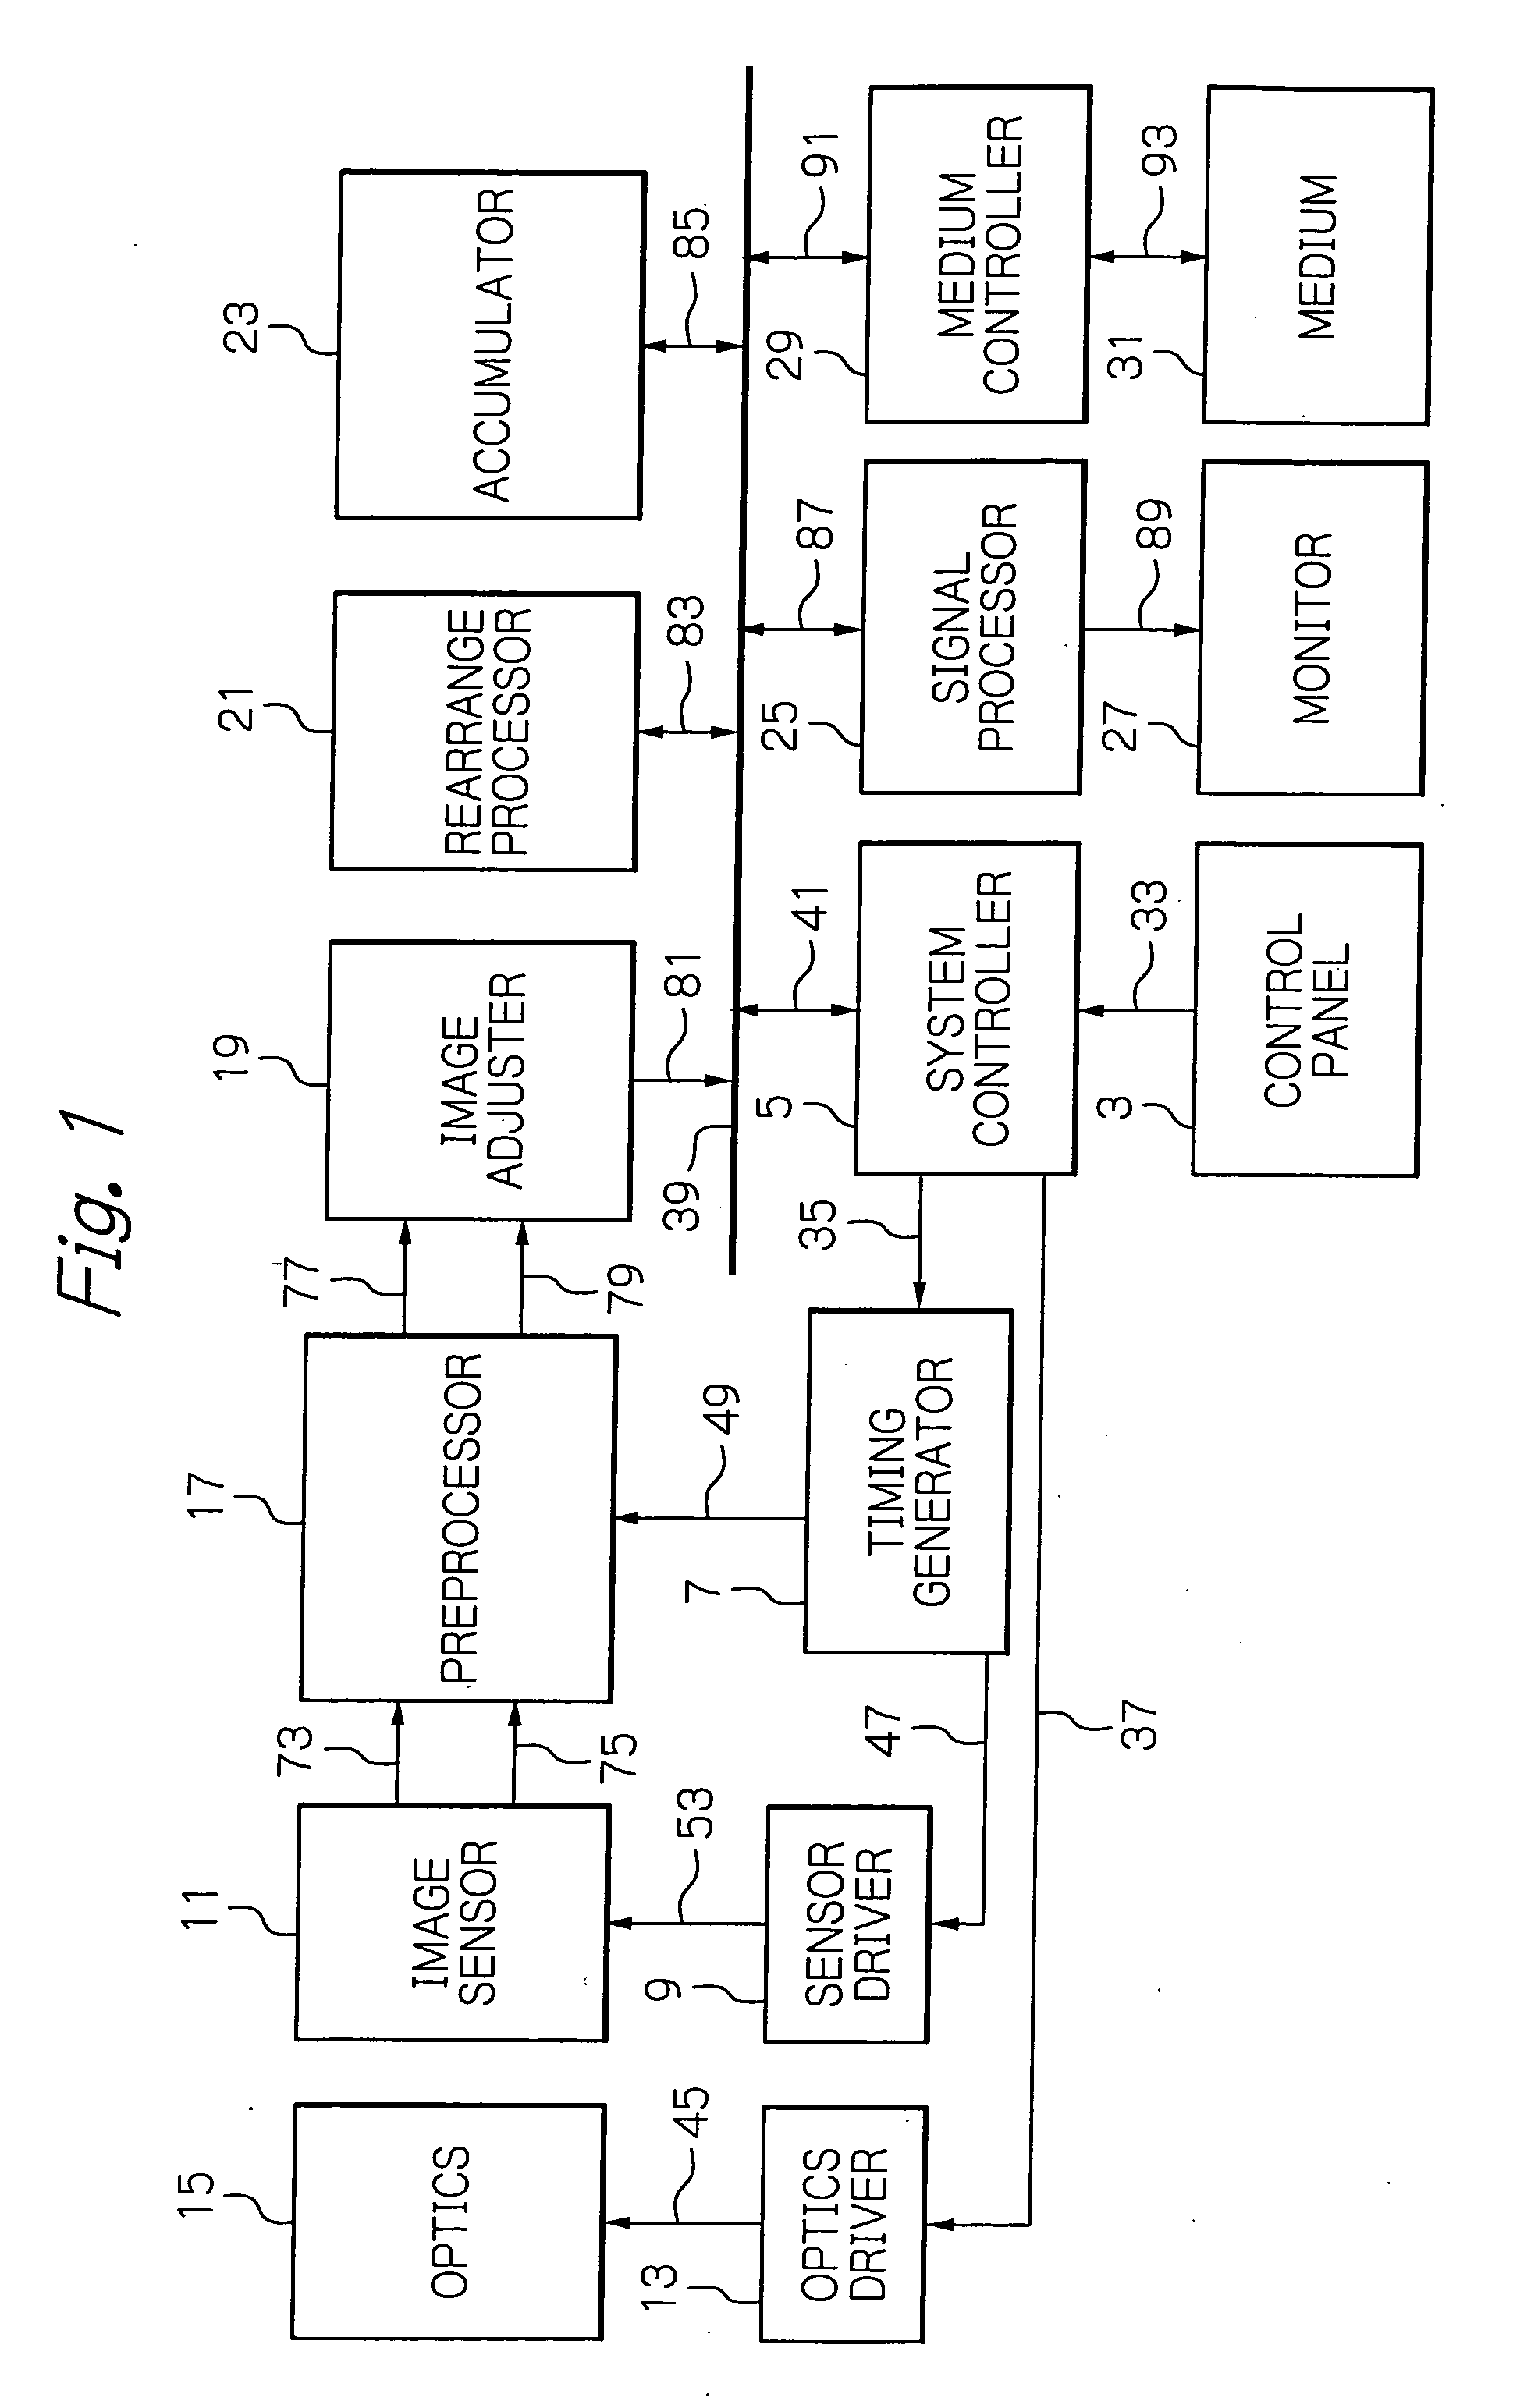 Digital camera for producing a frame of image formed by two areas with its seam compensated for